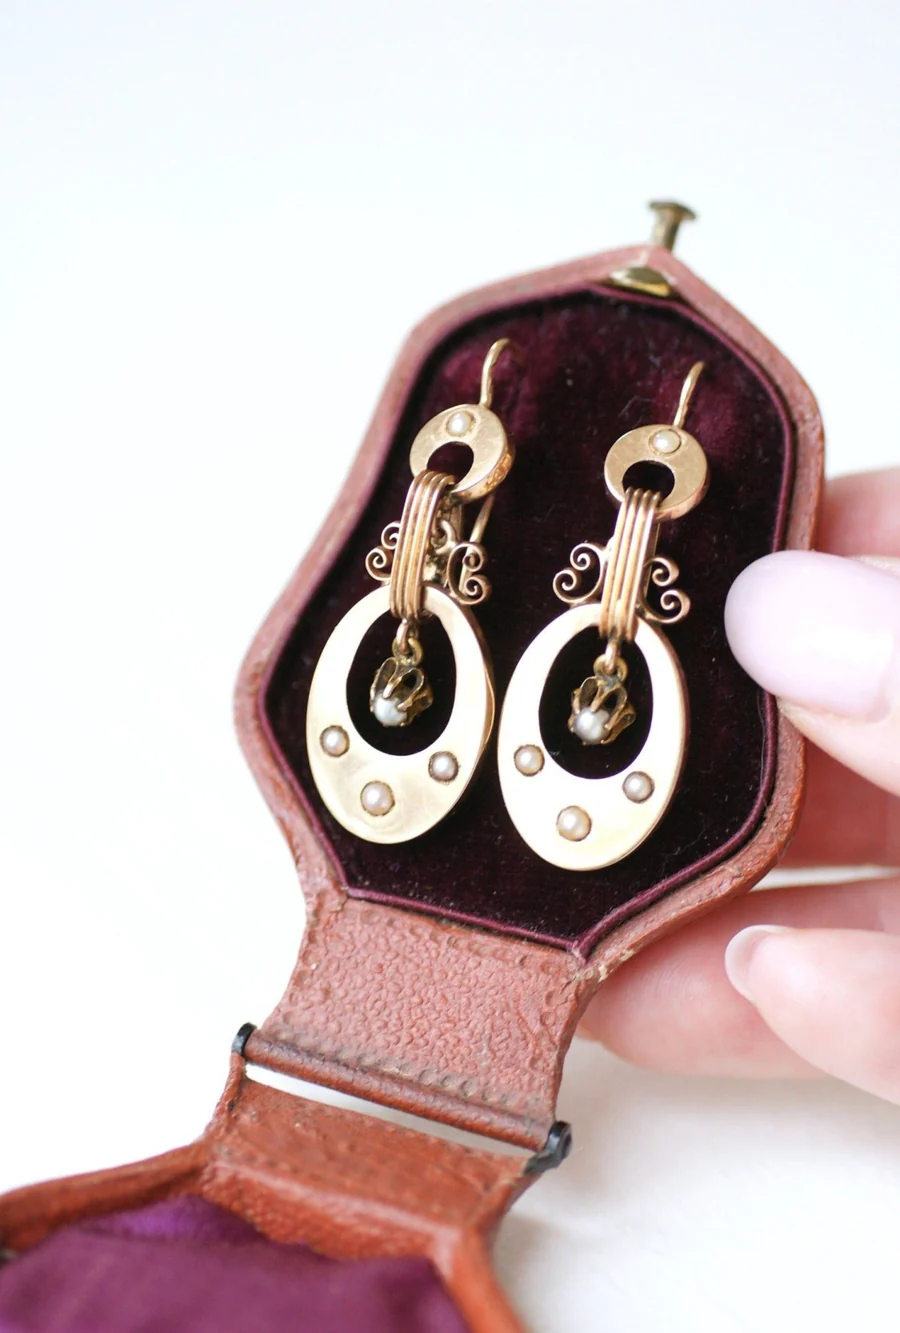 Napoleon III earrings, rose gold and pearls - Penelope Gallery